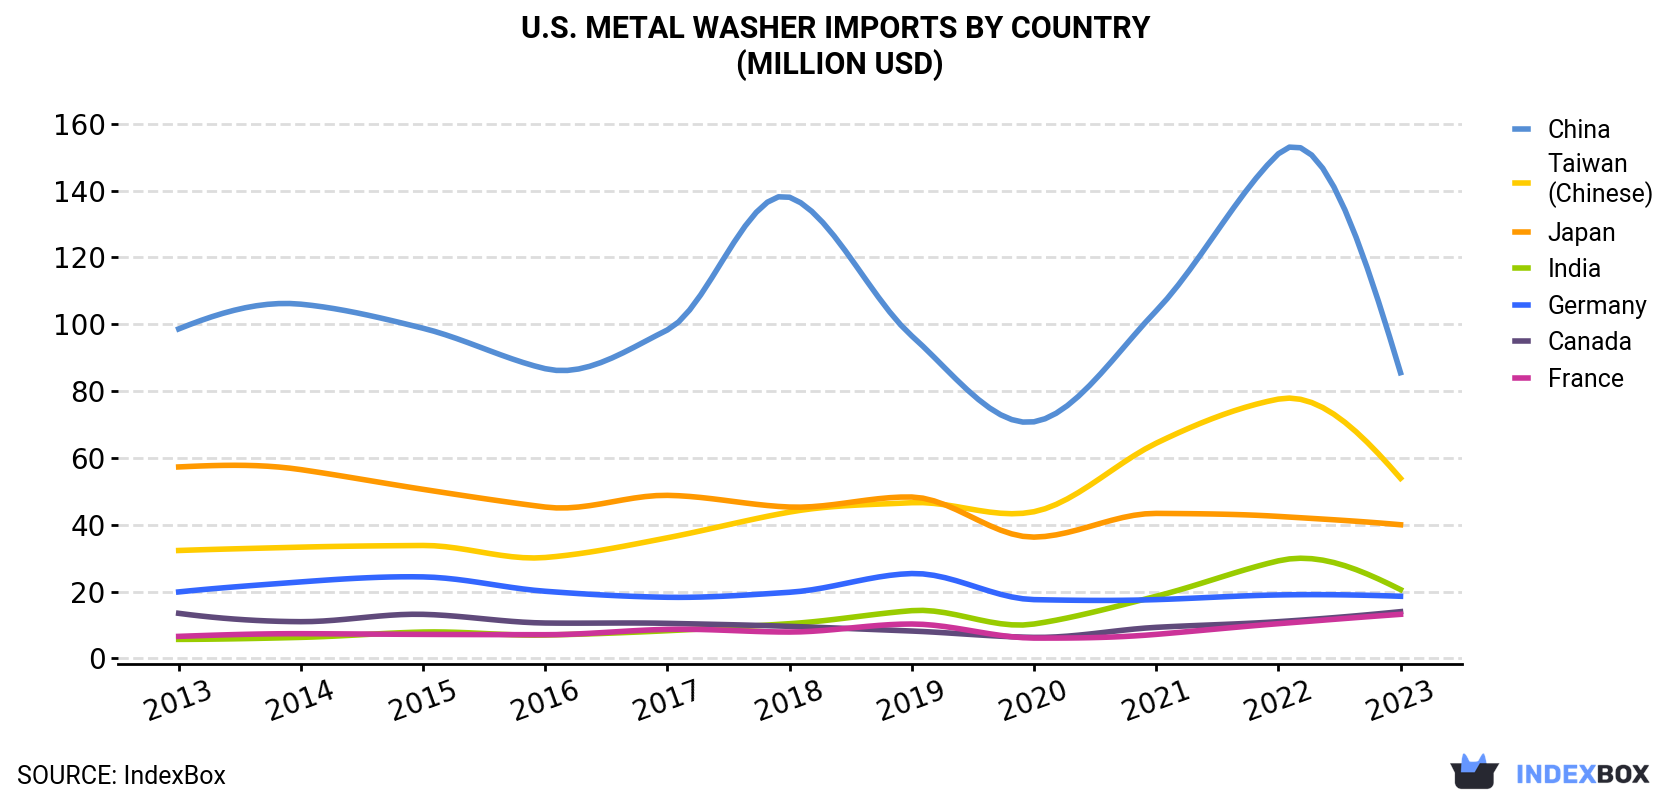 U.S. Metal Washer Imports By Country (Million USD)